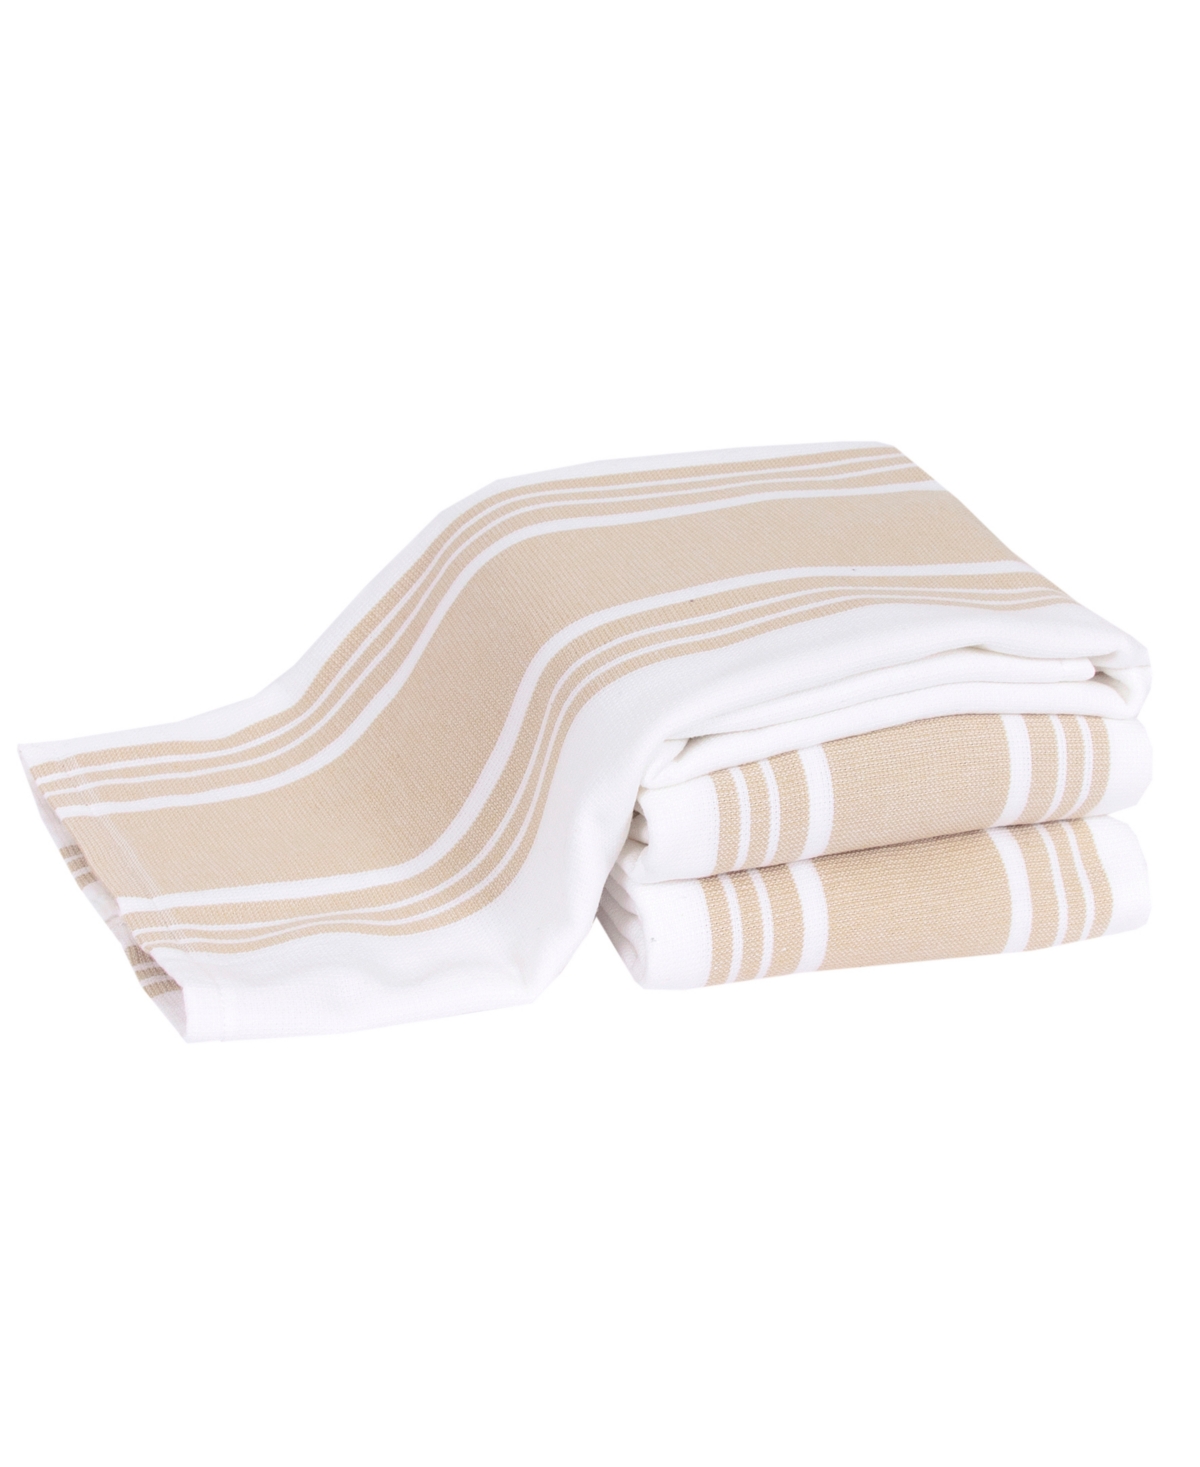 Stripe Dual Sided Woven Kitchen Towel, Set of 3 - Cappuccino